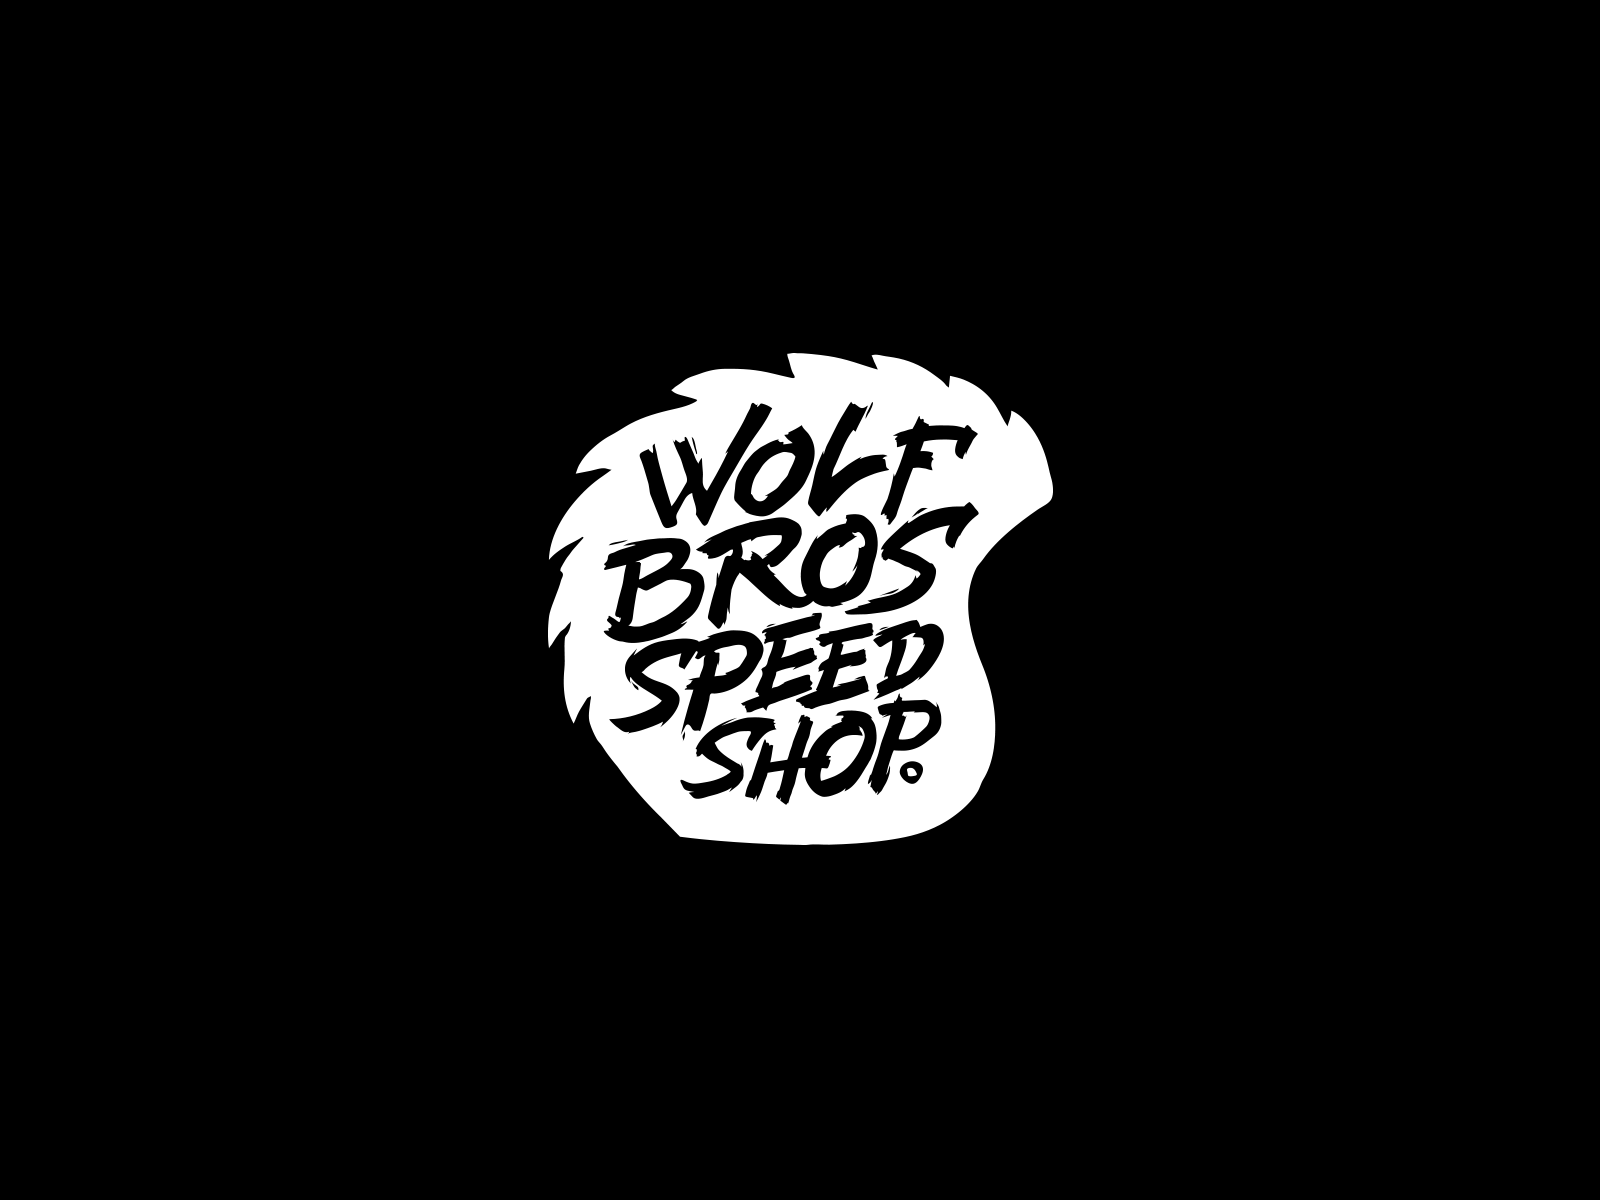 Wolfbros Cafe